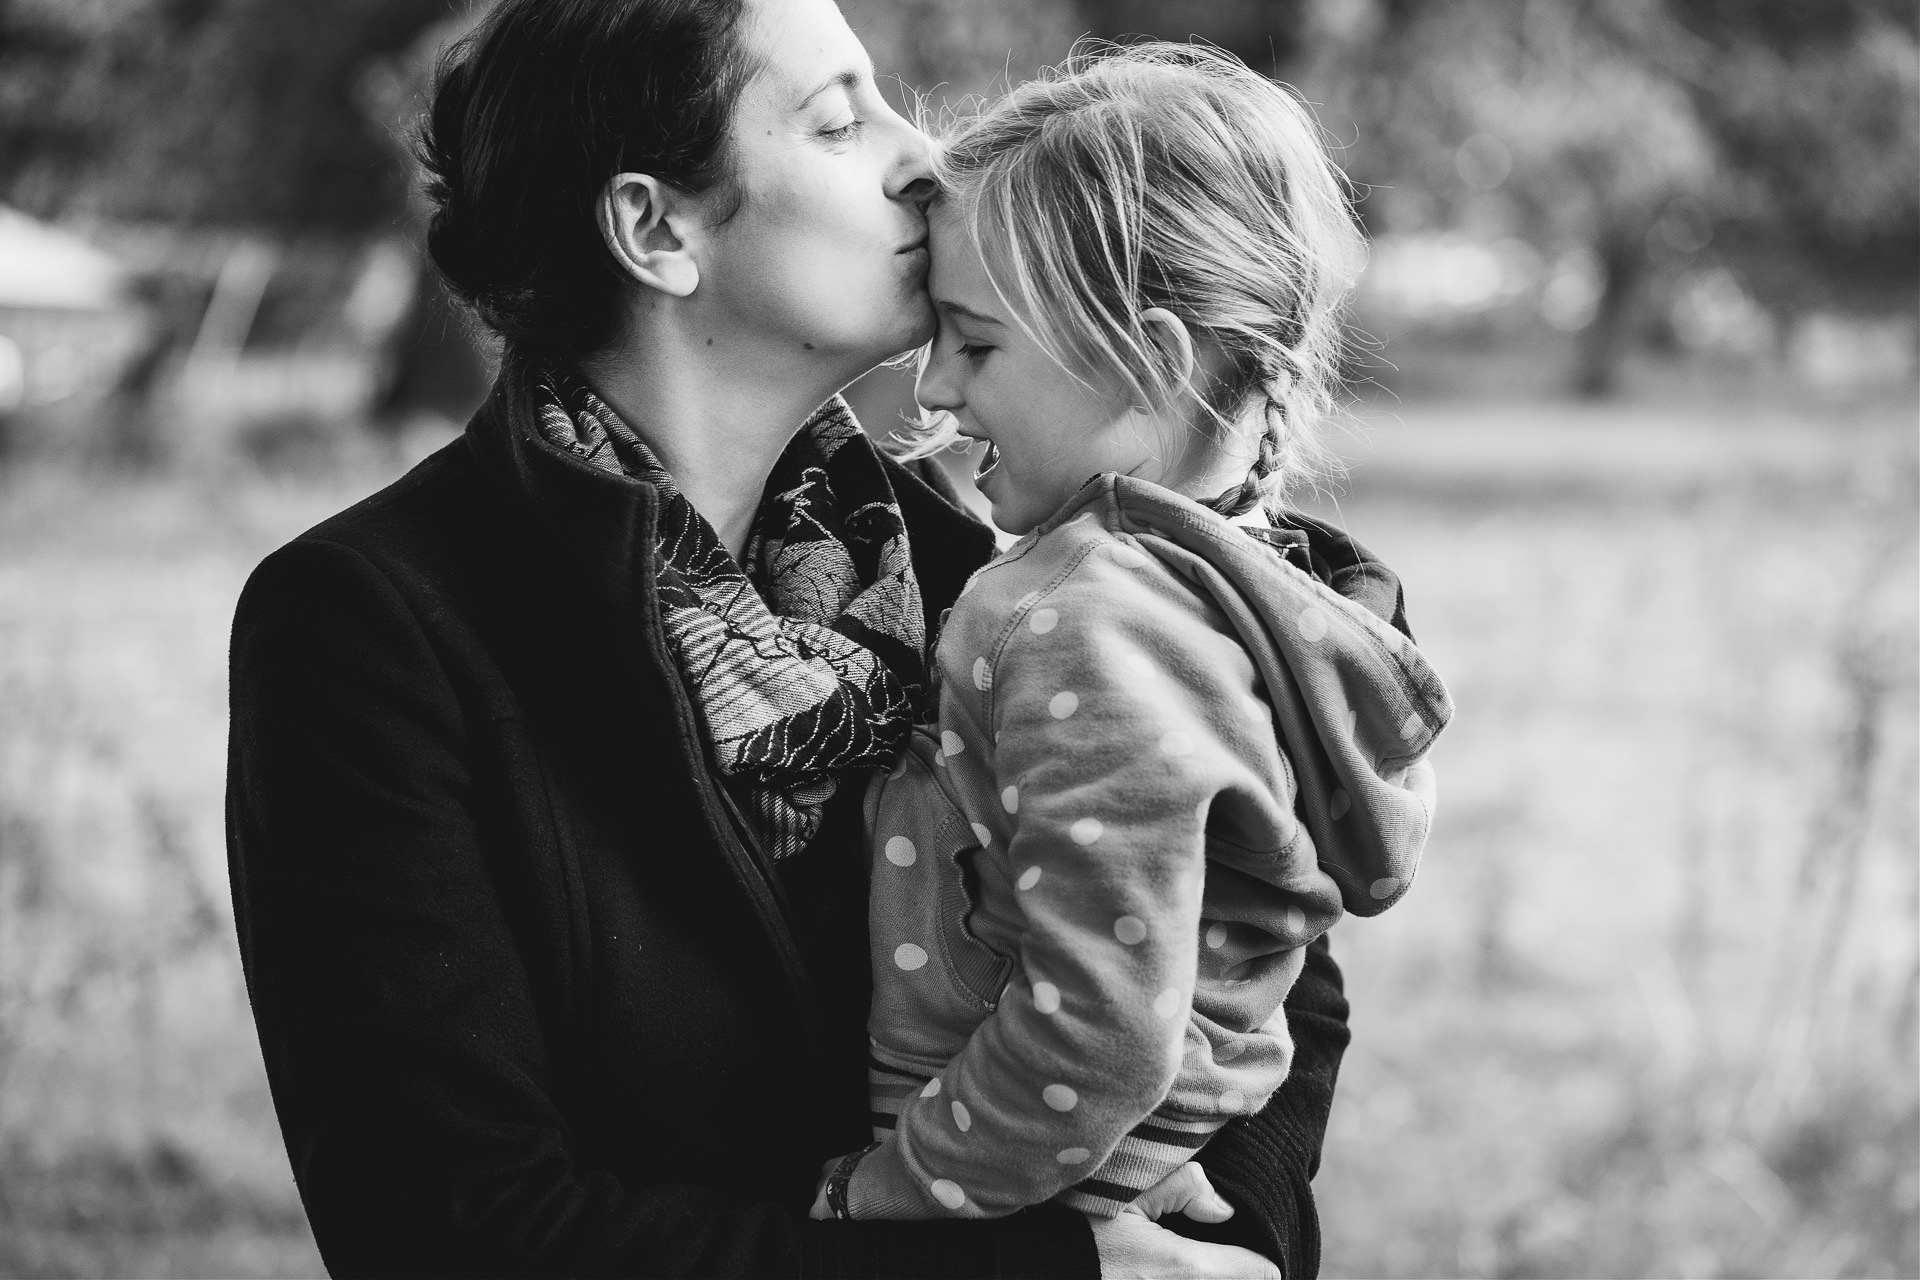 A mother kissing her daughter on the forehead